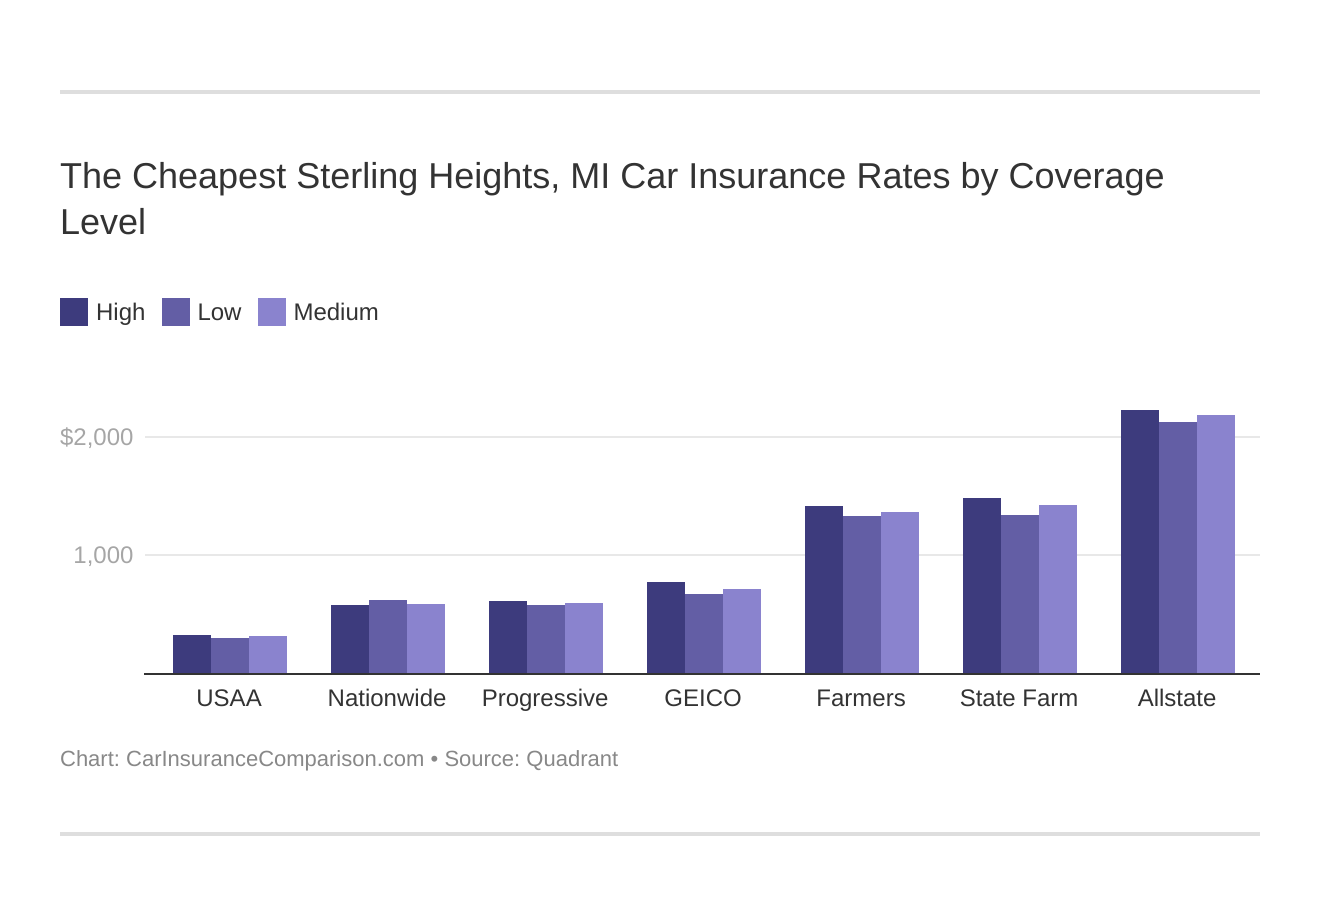 The Cheapest Sterling Heights, MI Car Insurance Rates by Coverage Level